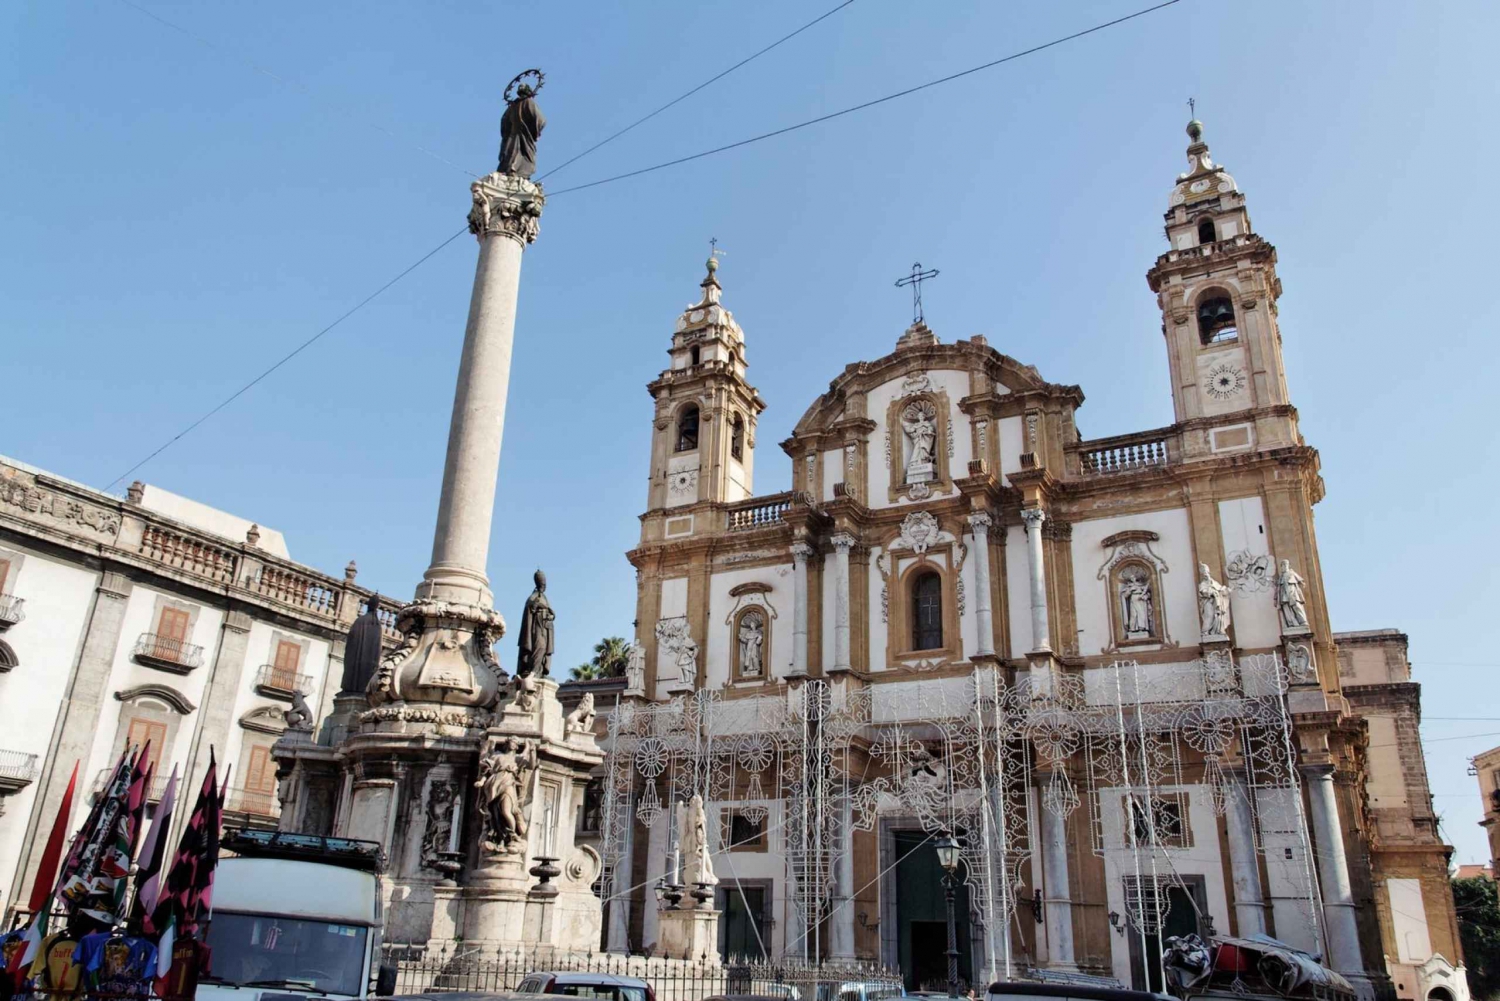 Palermo: UNESCO World Heritage Sites Guided Walking Tour